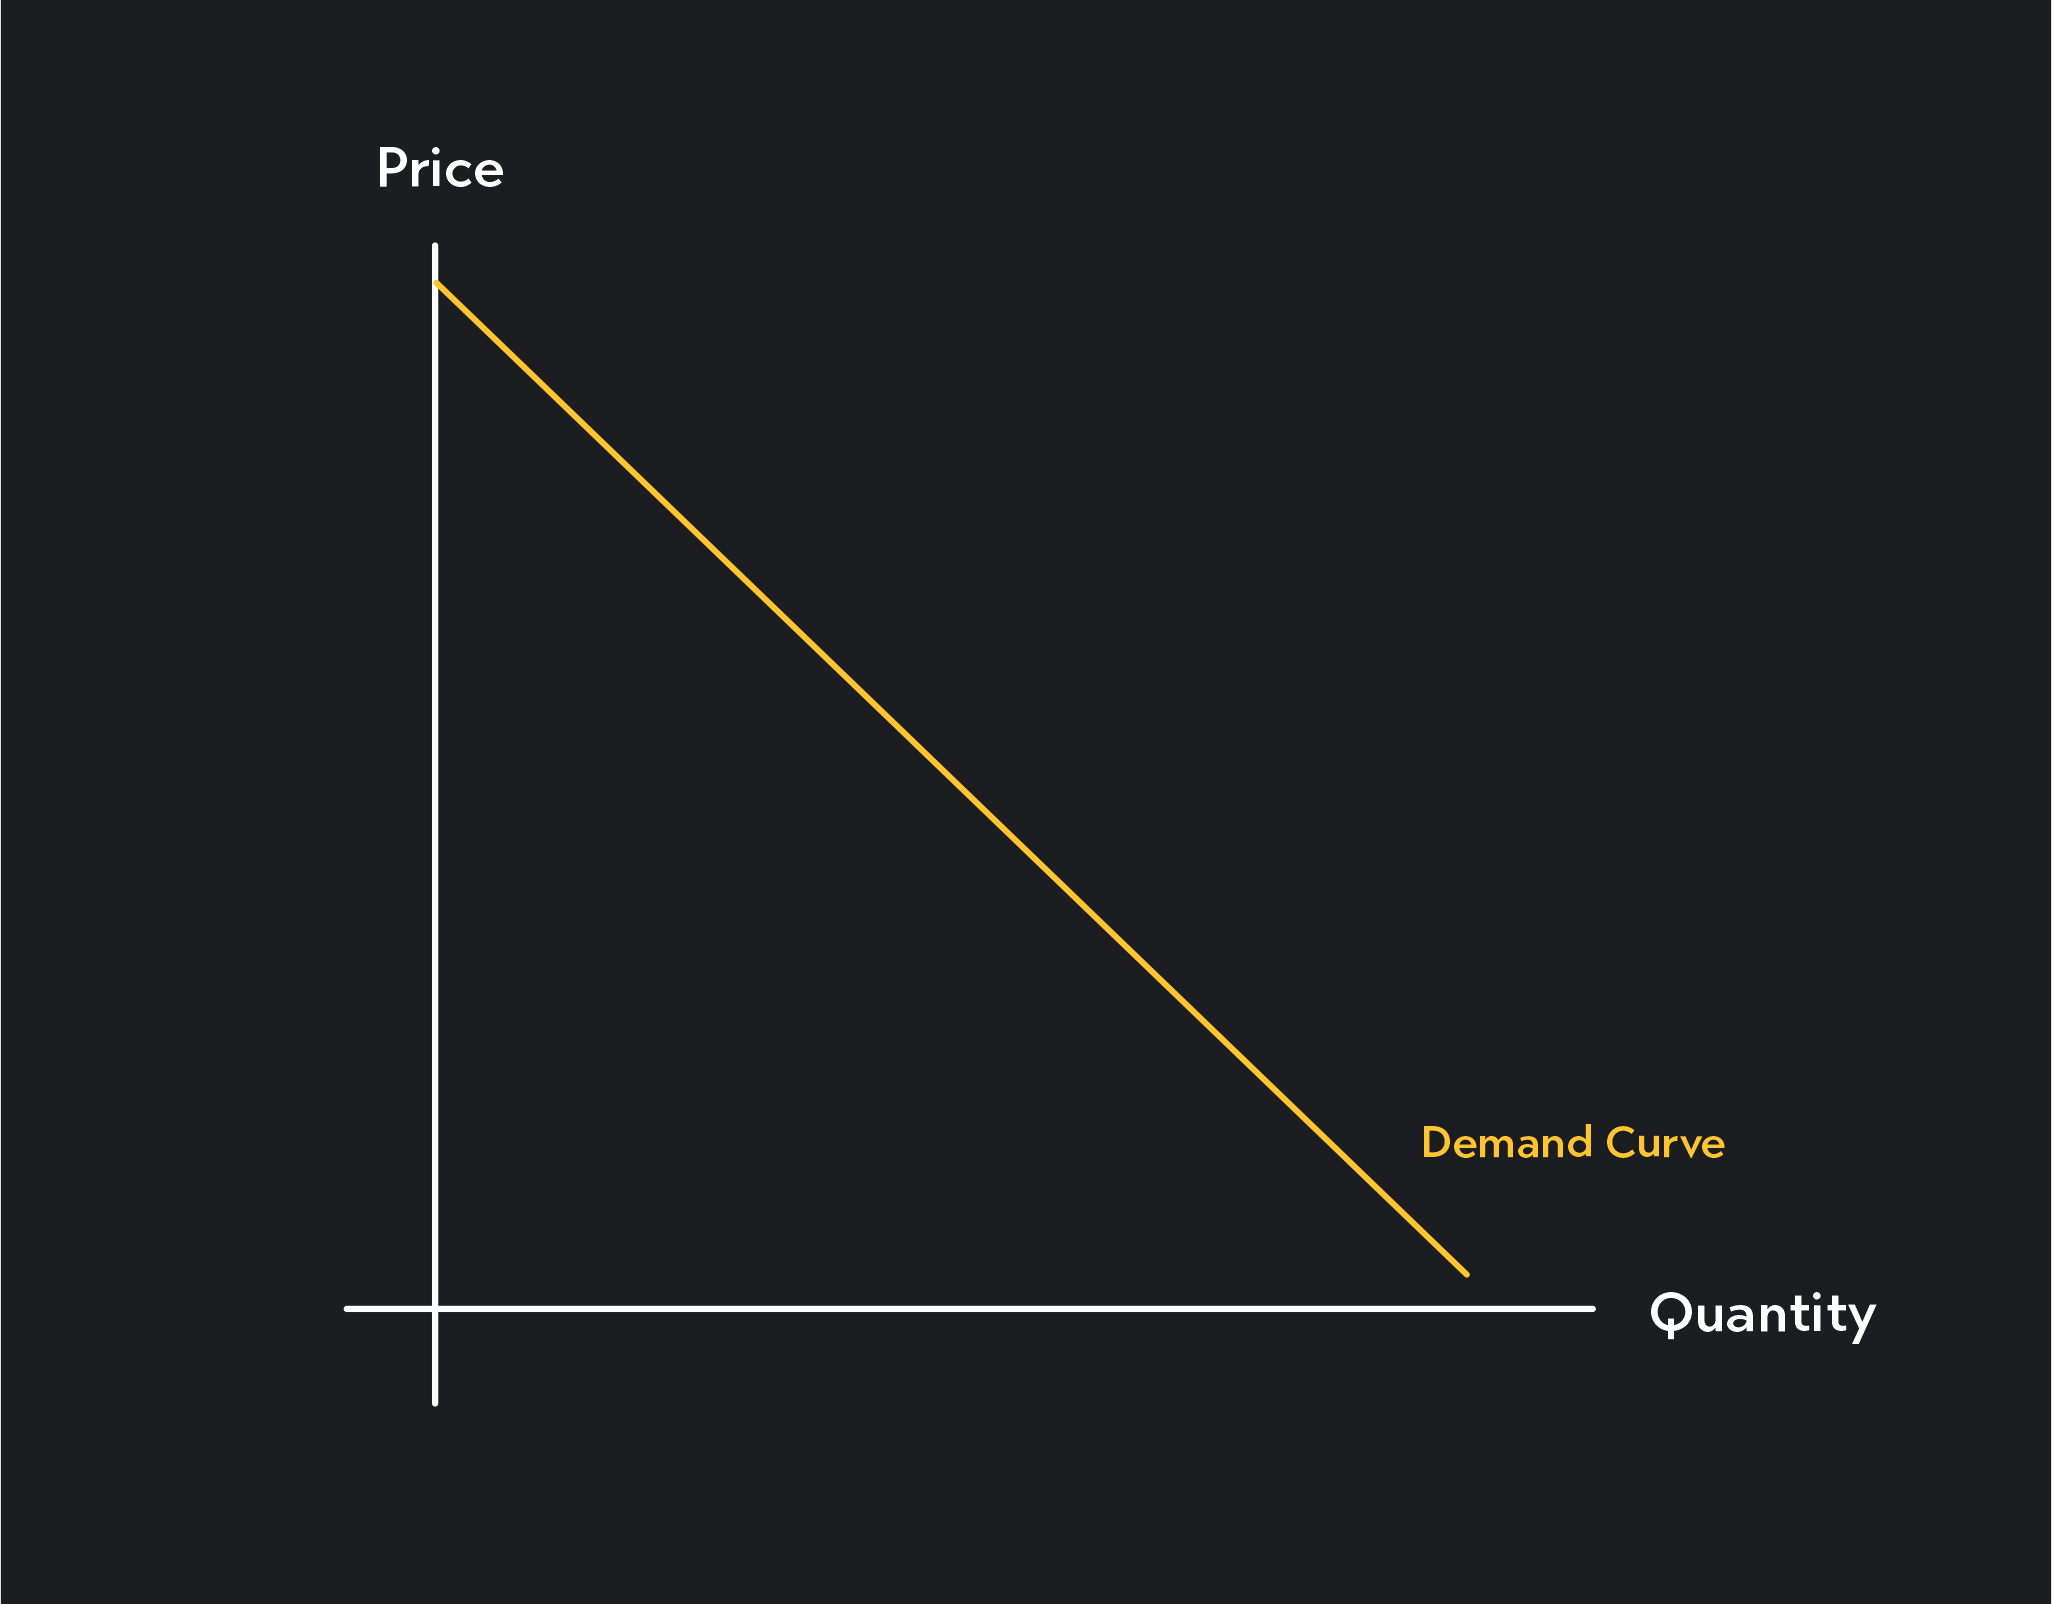 Overview of Movement vs. Shift in the Demand Curve